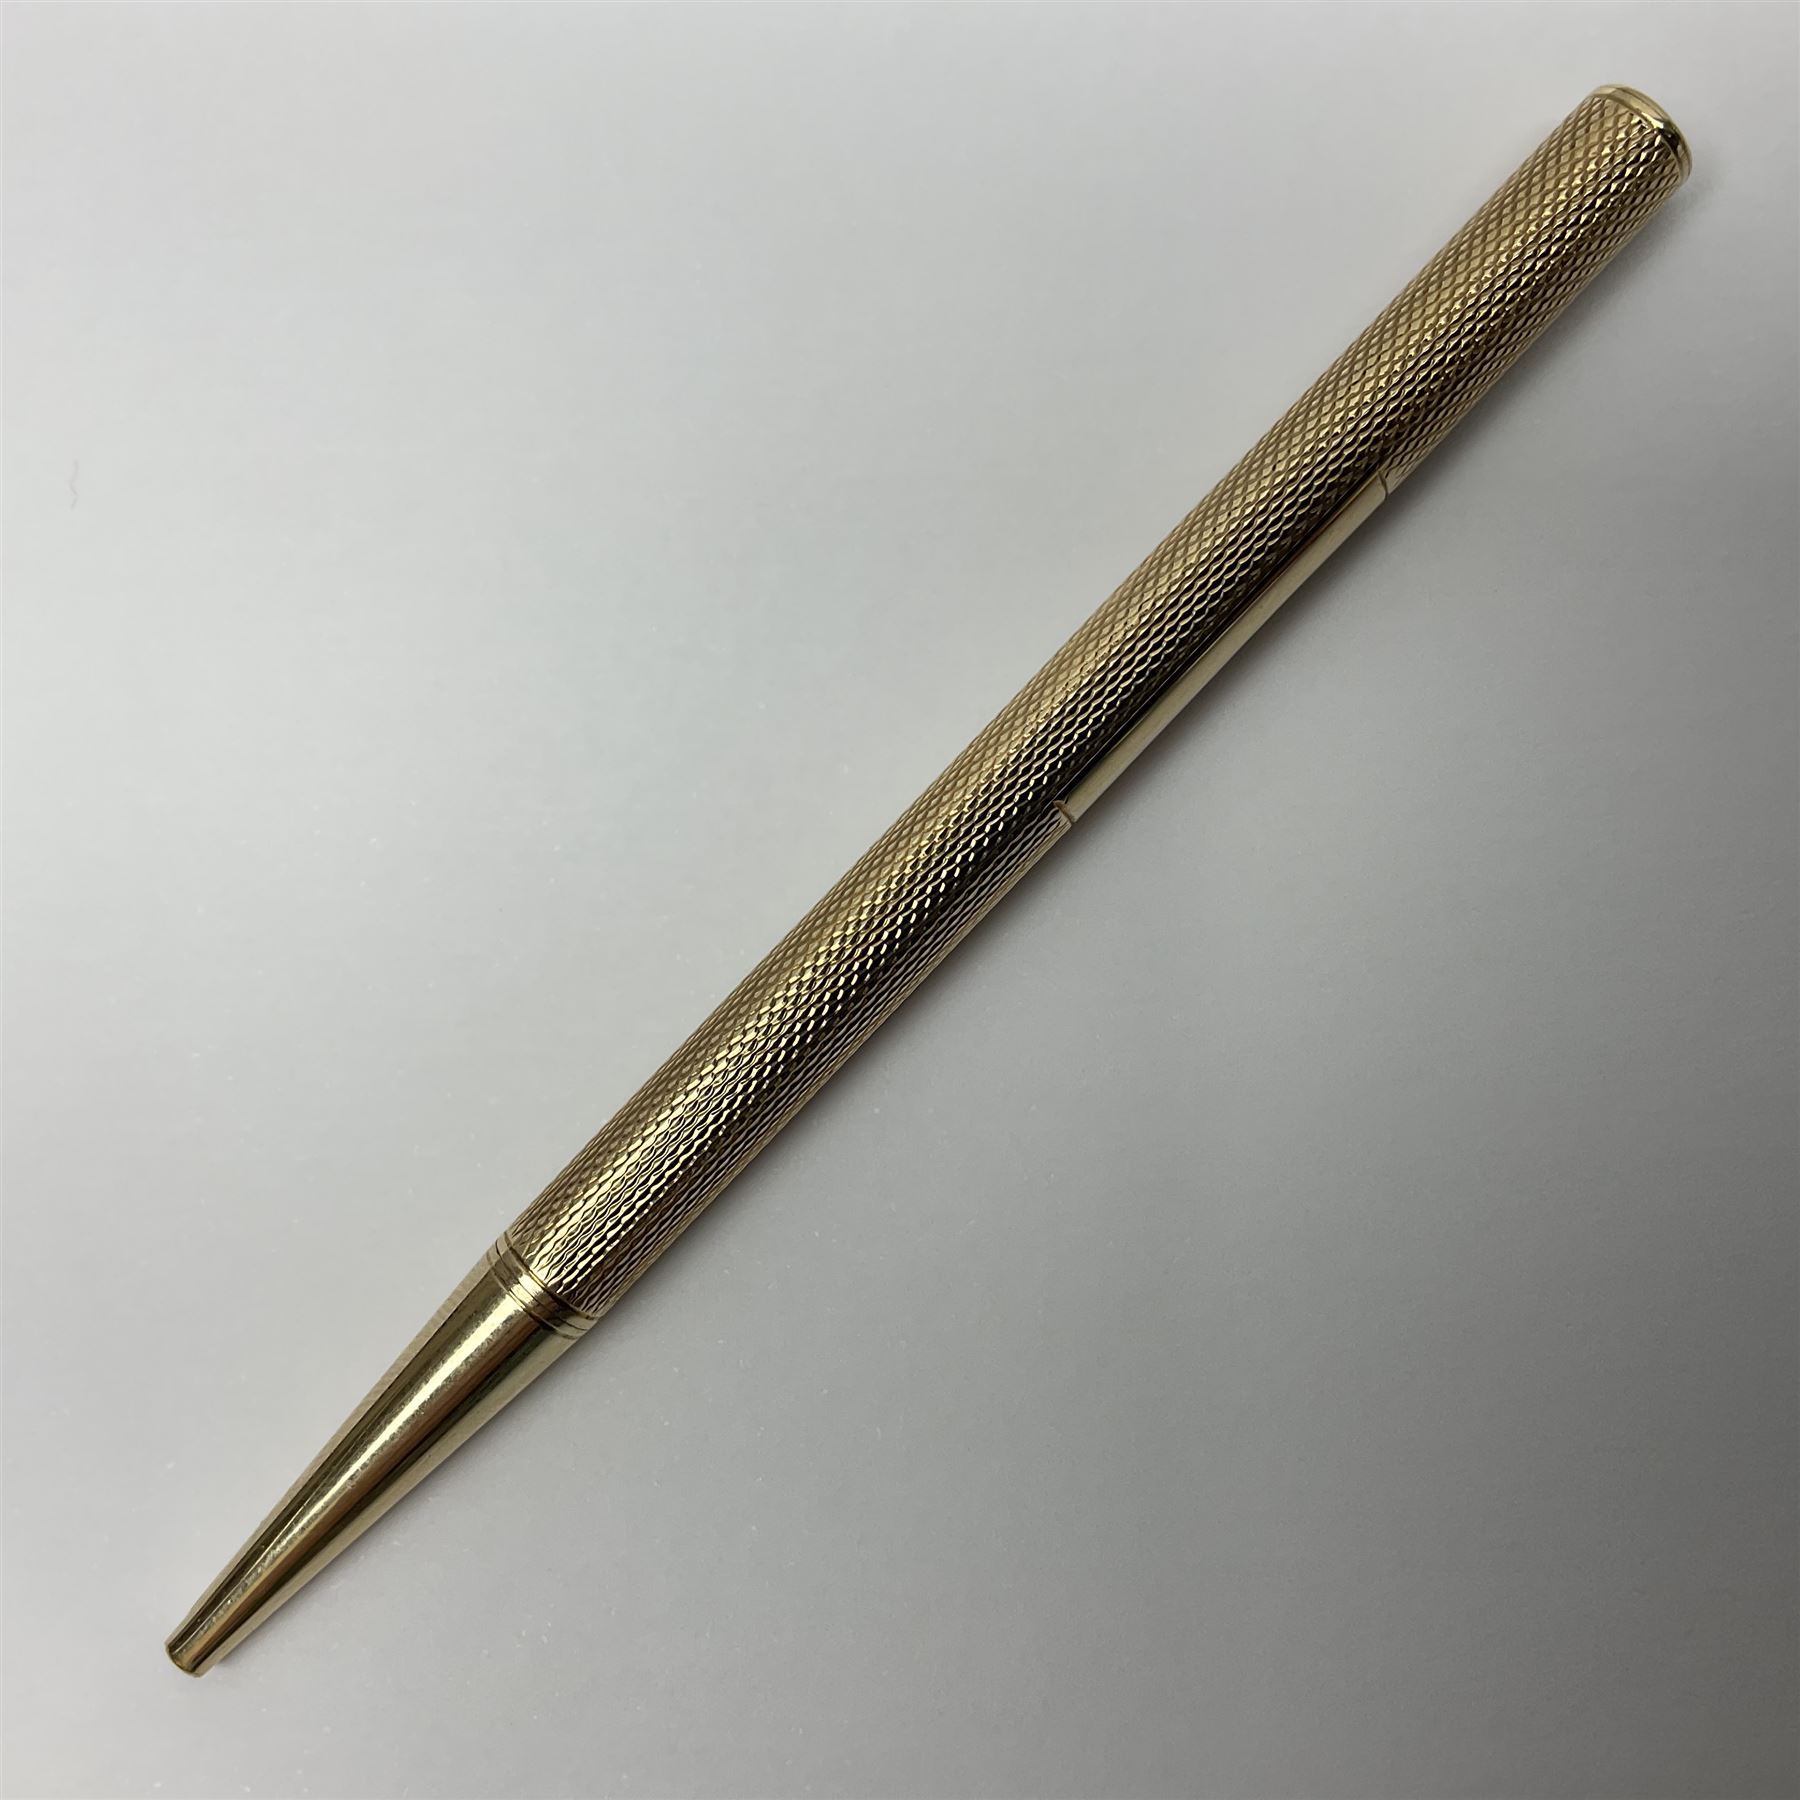 9ct gold propelling pencil - Image 9 of 9